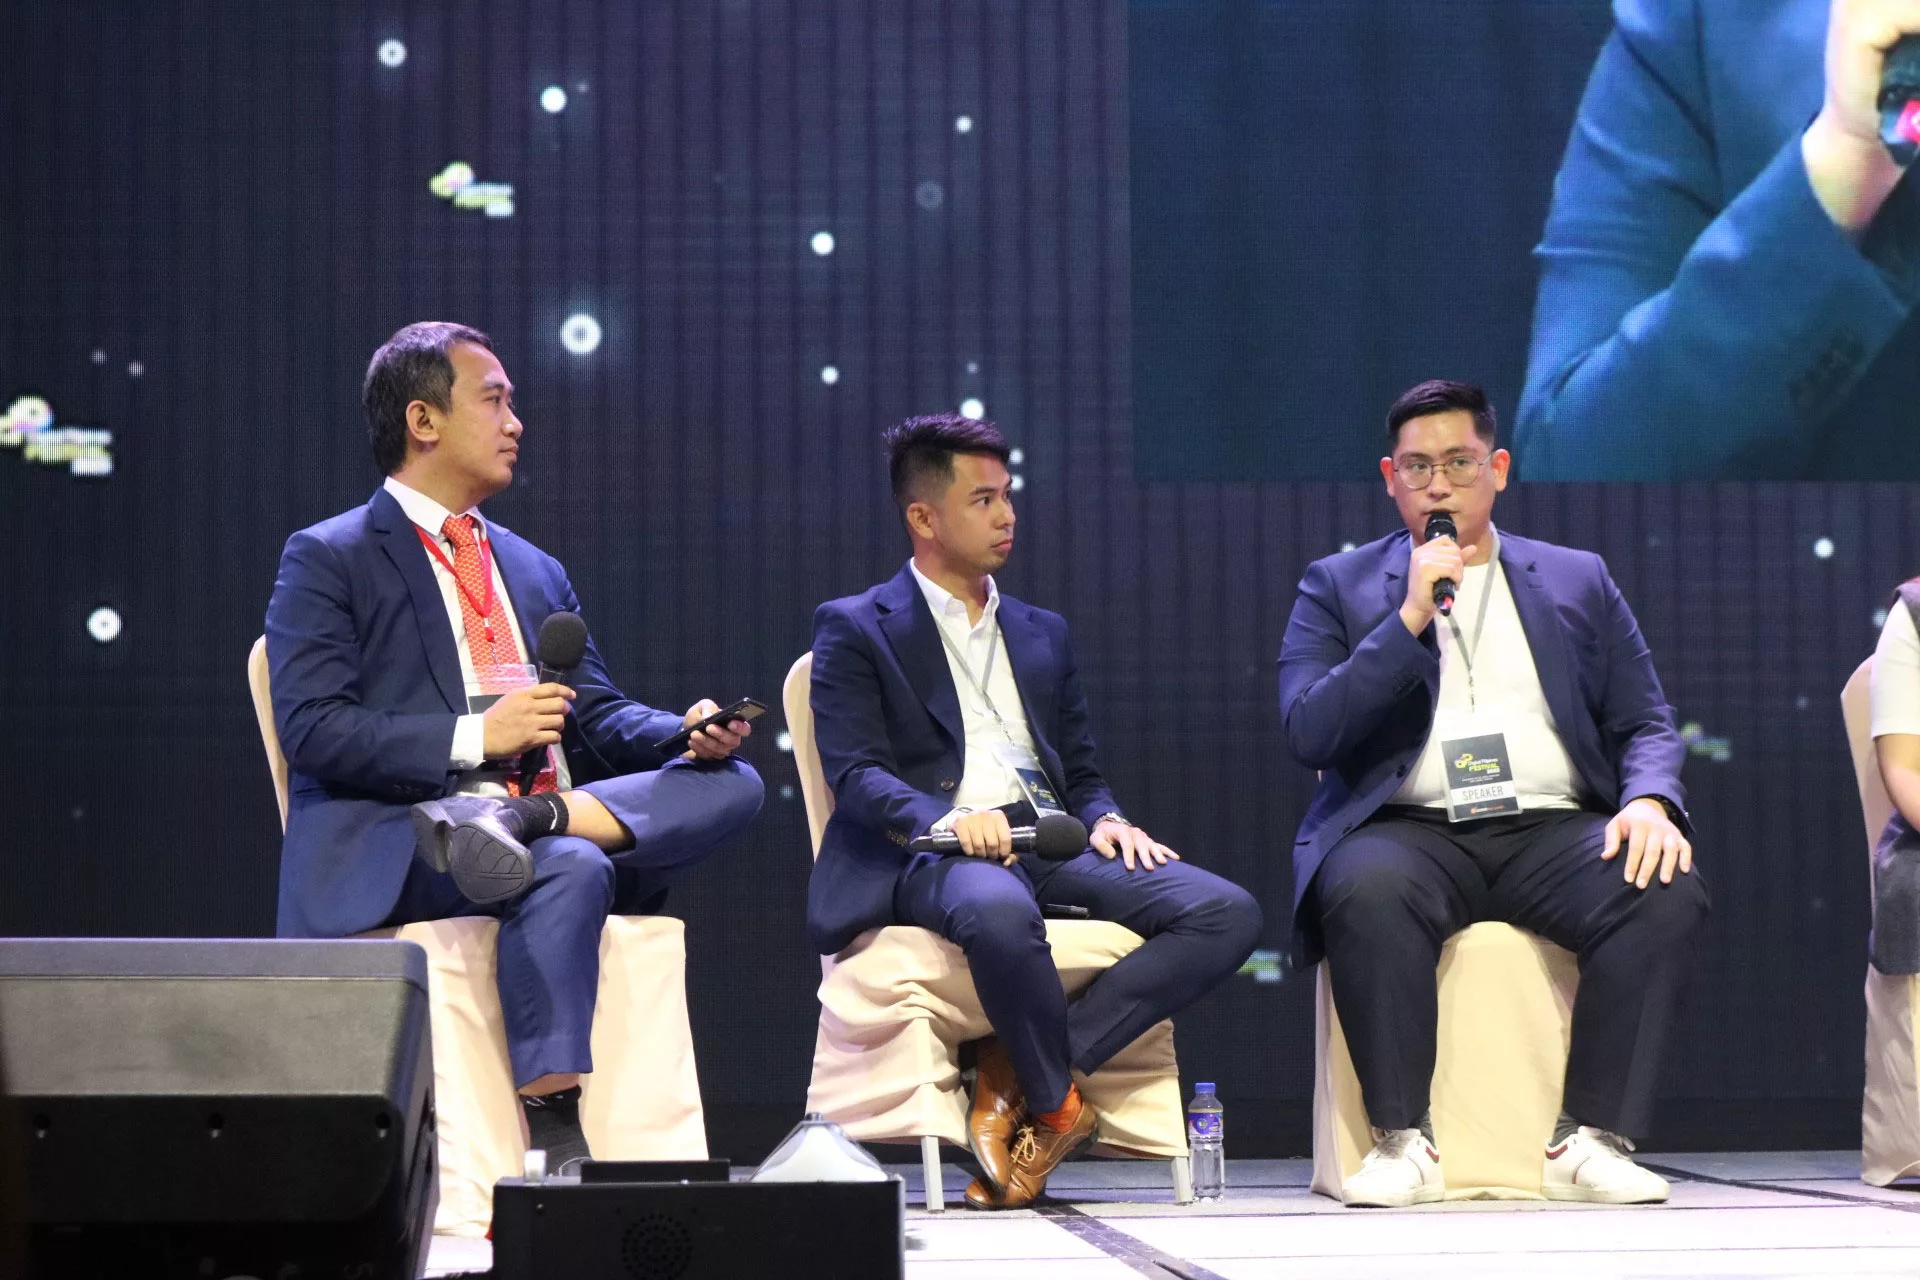 Moises Benedict Carandang, Kristoffer Briones, and Rene Cuartero at the second Digital Pilipinas Festival 2023